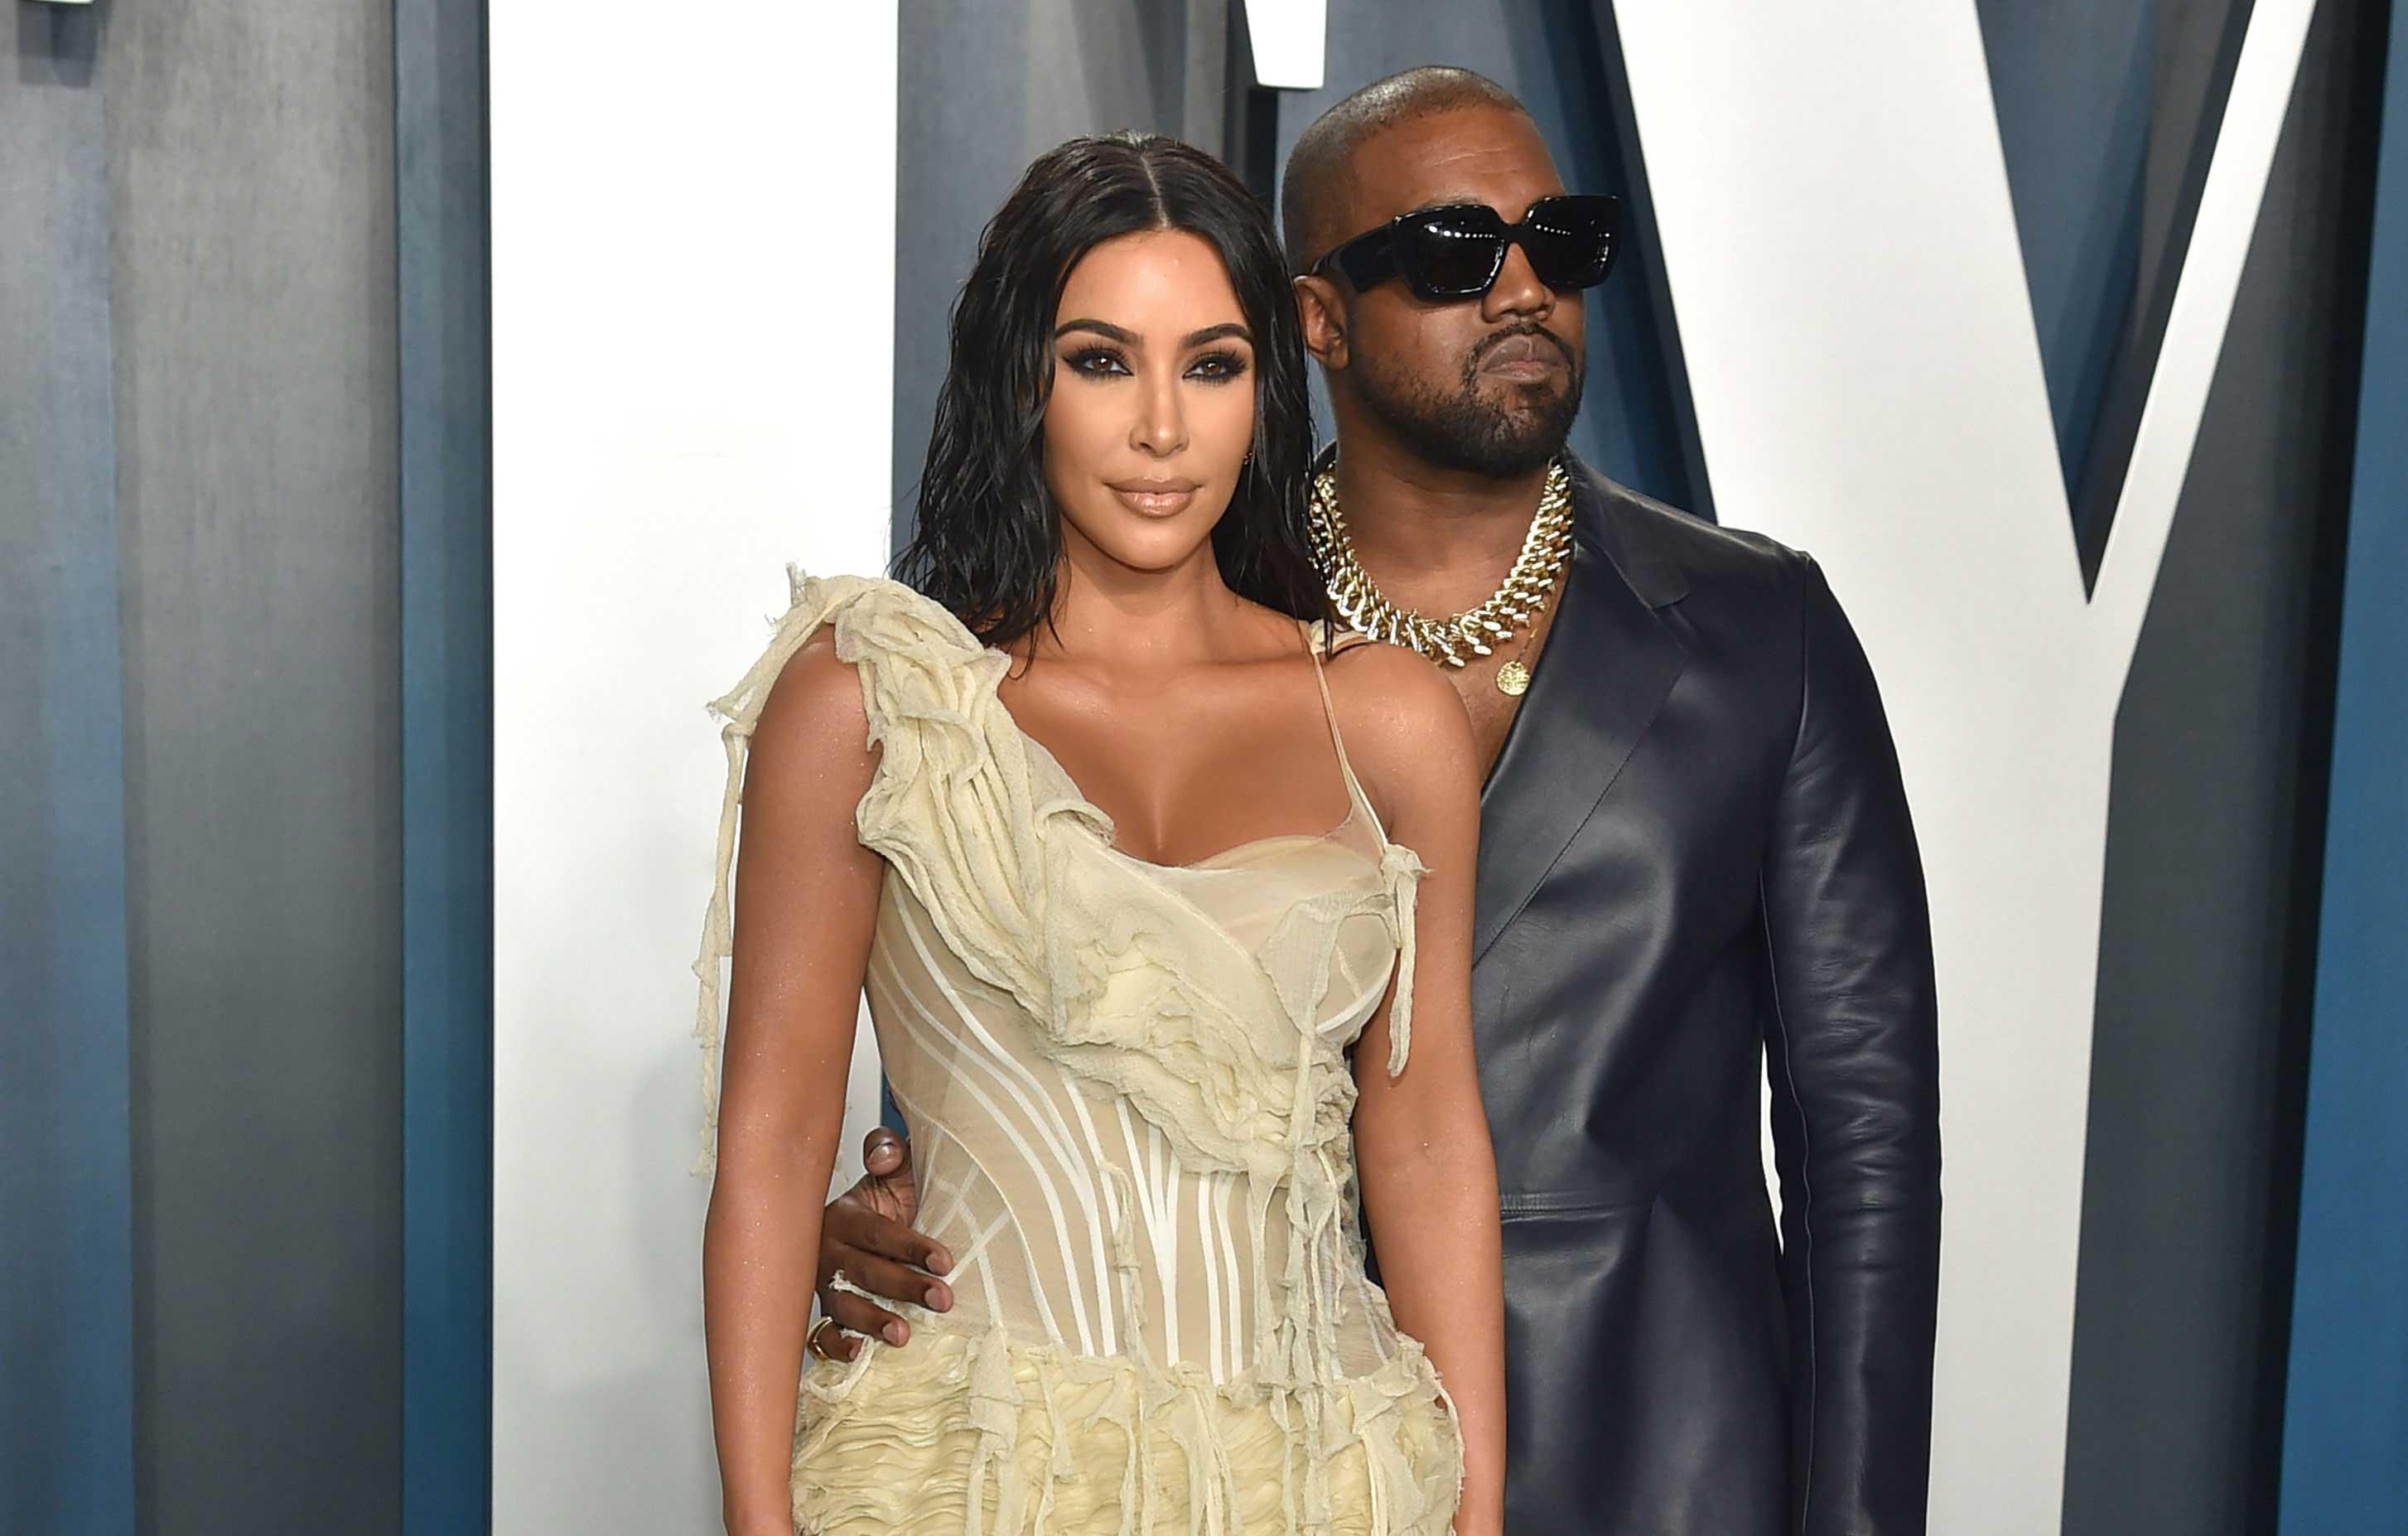 Kim Kardashian 'Disgusted' By Kanye West's 'White Lives Matter' Photo